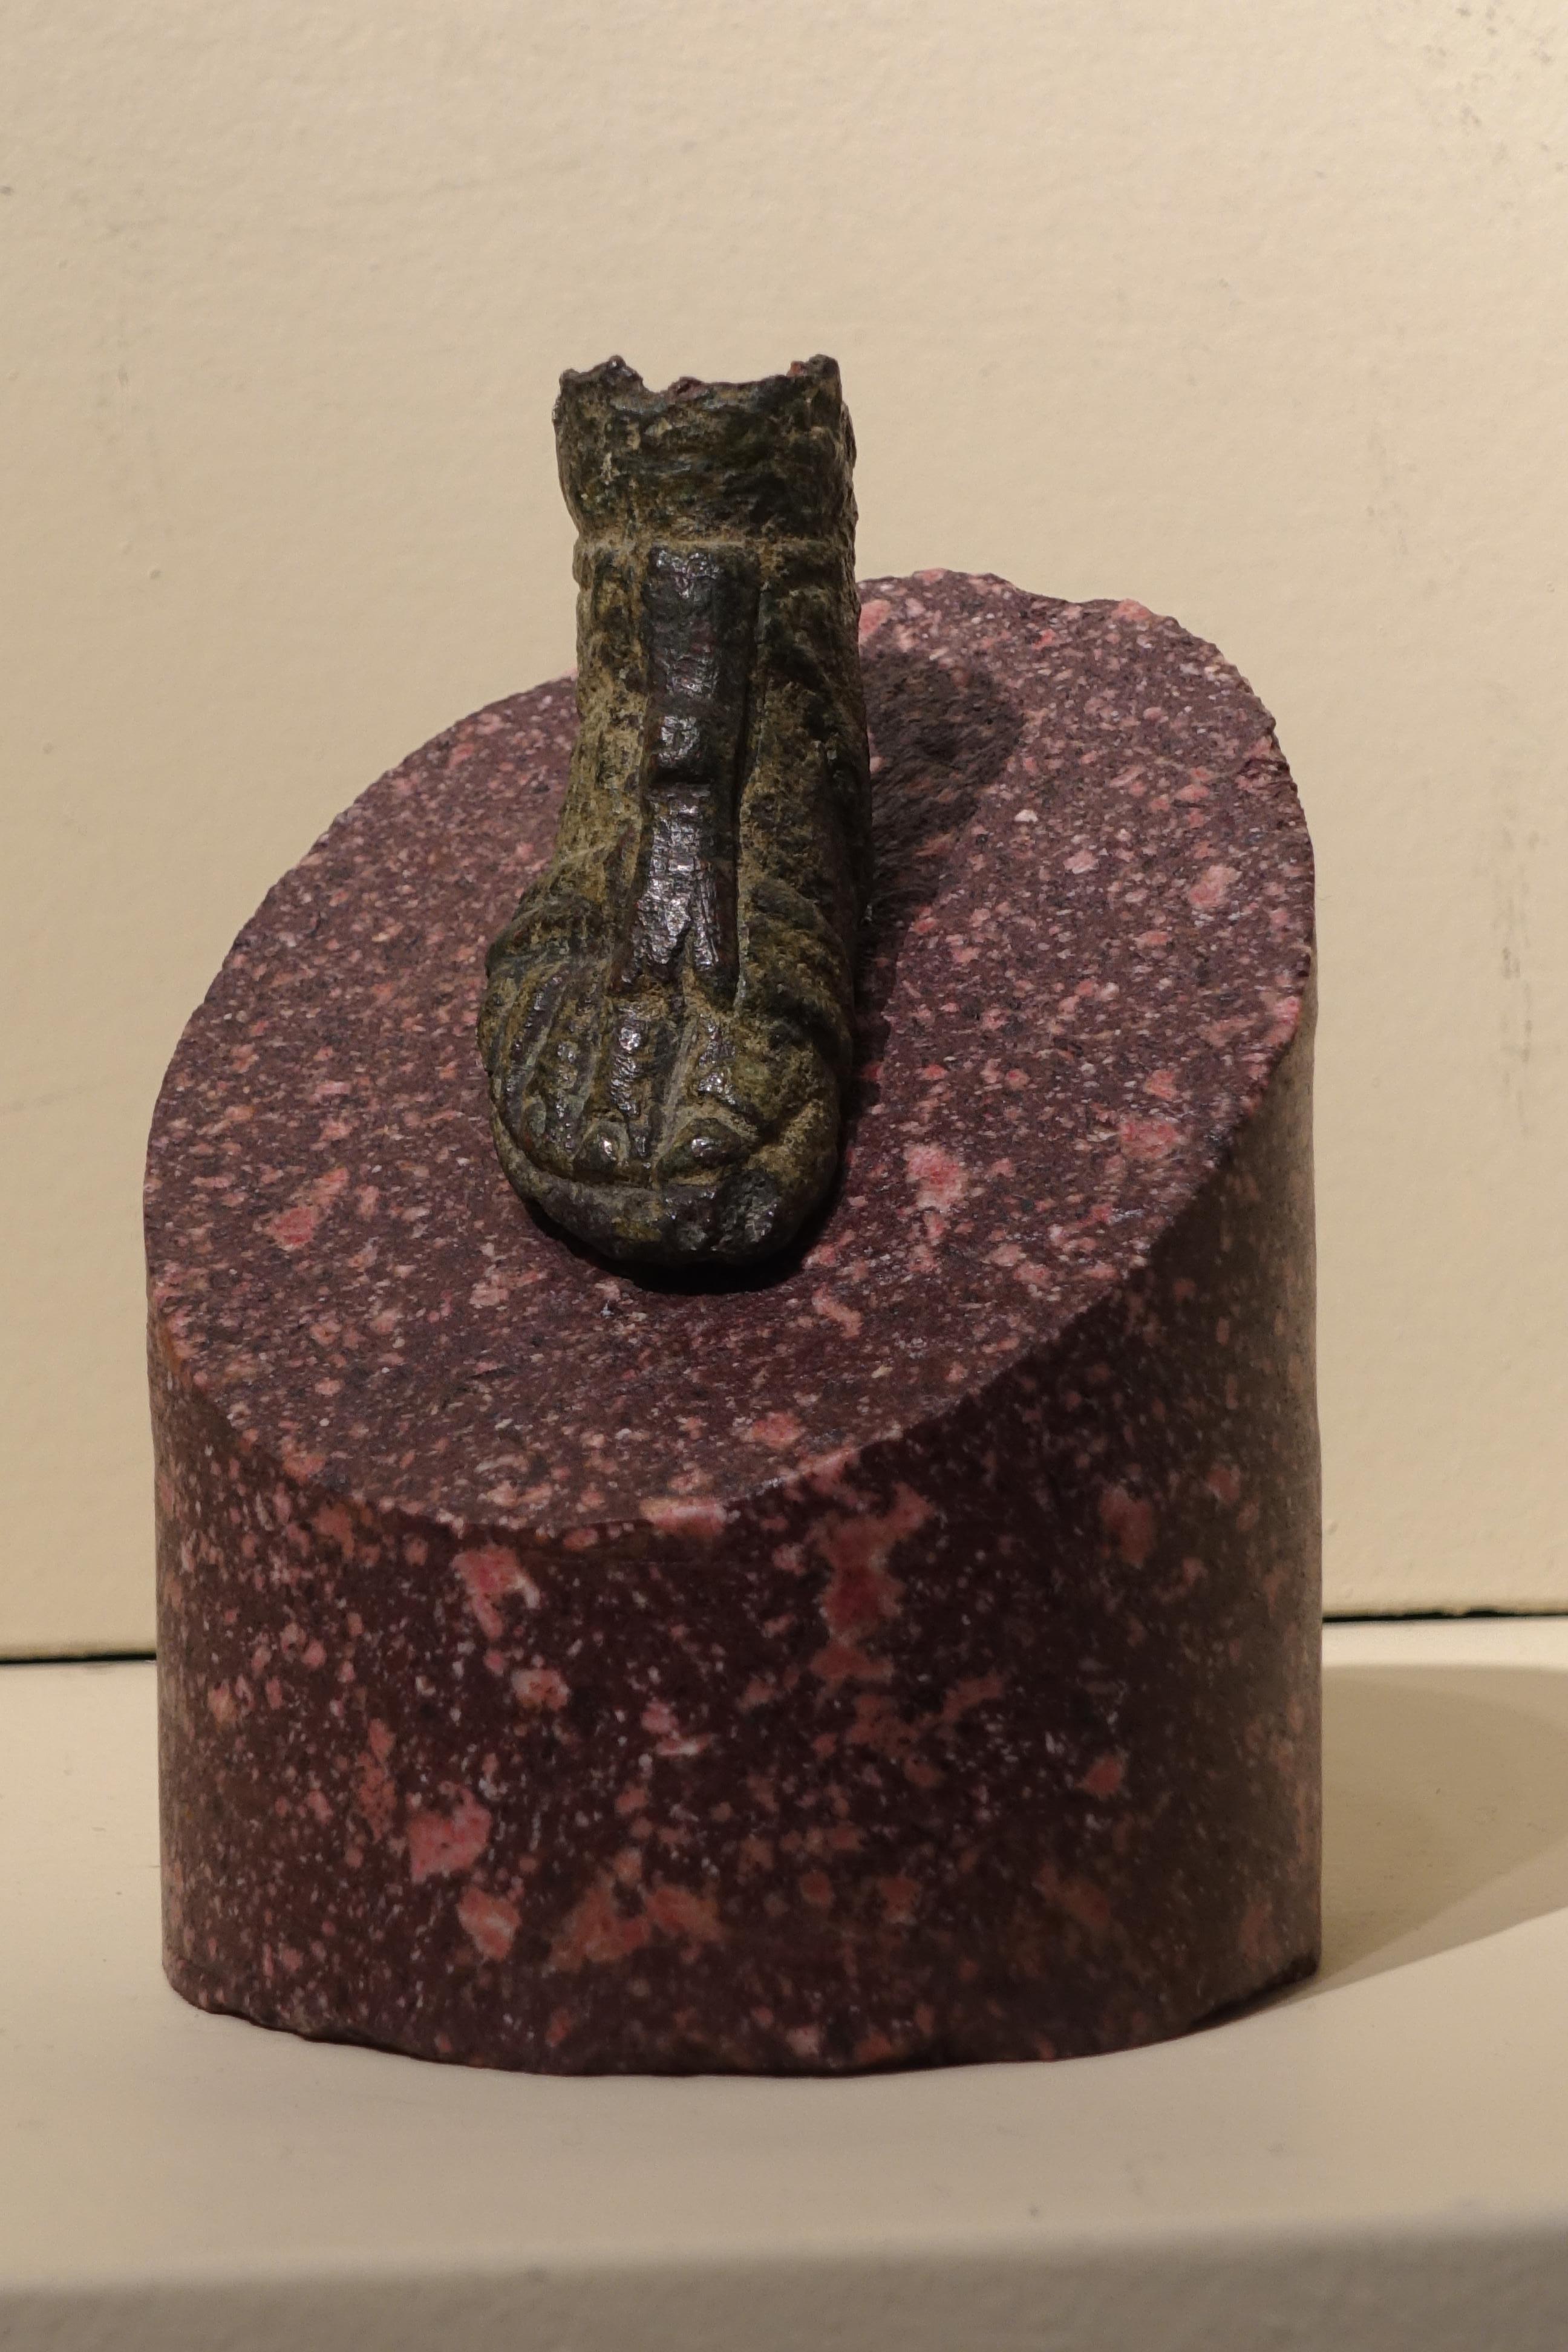 Roman bronze sandaled foot from a statuette
Roman, 2nd century AD
Bronze, on an Egyptian imperial red porphyry base
Foot : Height 3,6 x length 6,3 x depth 2,2 cm
porphyry base : height 8 ; diameter 7 cm

The bronze is enhanced by its rich green